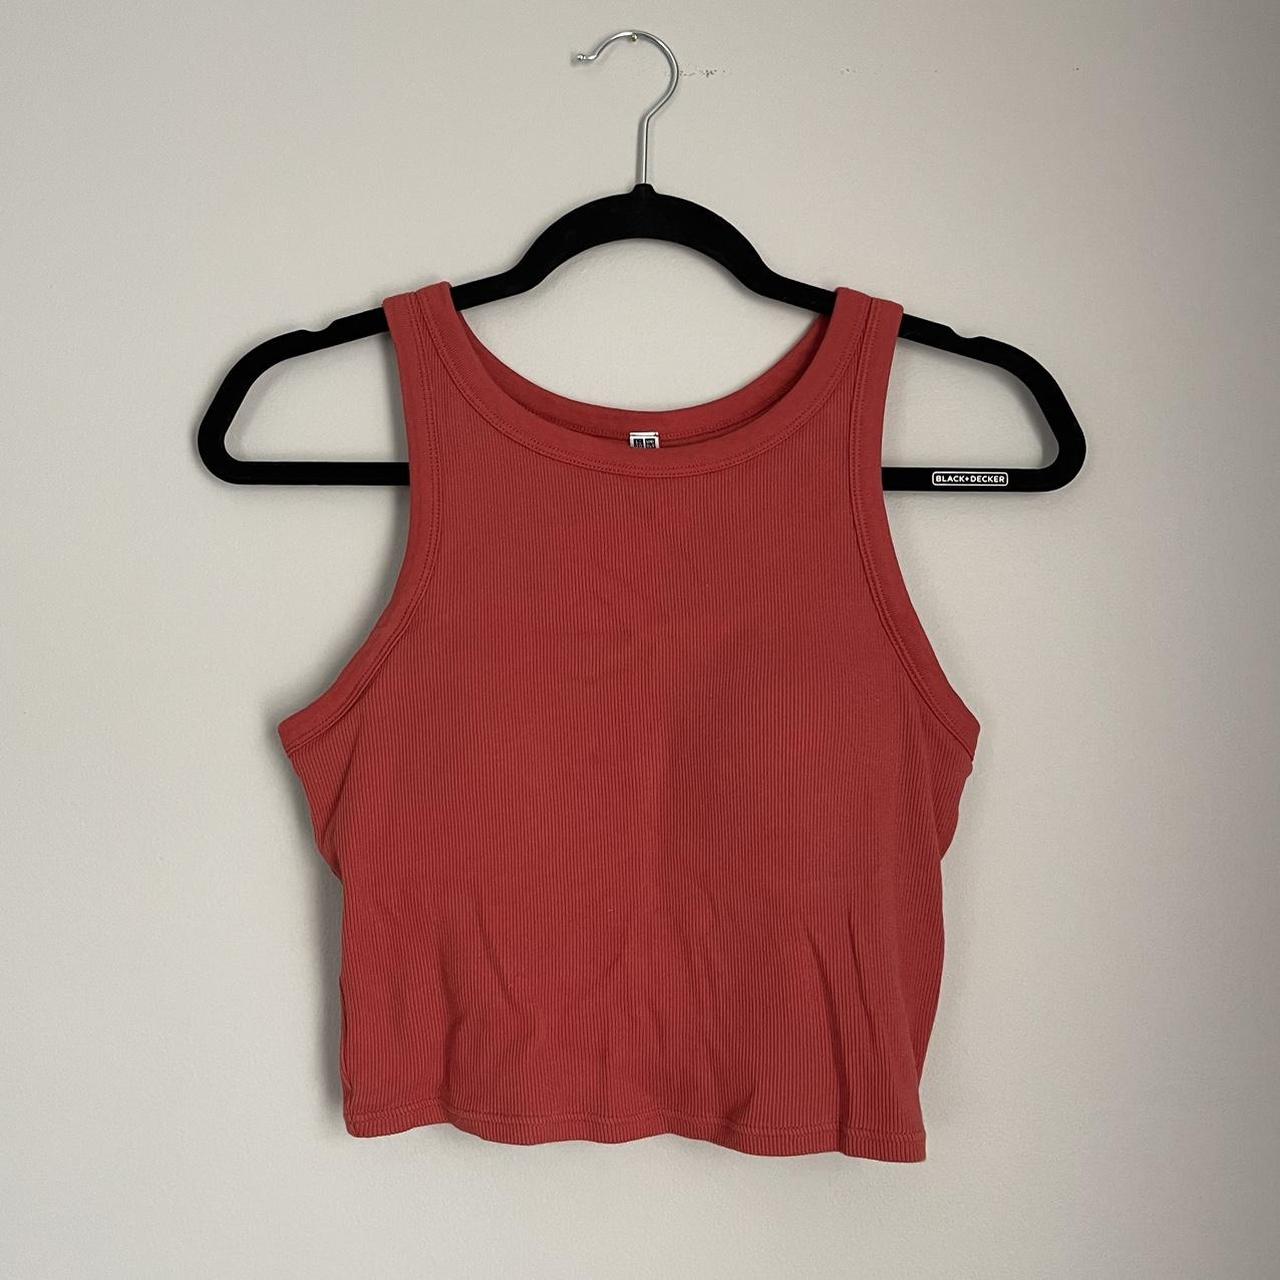 Uniqlo ribbed tank with built-in bra. I have so many... - Depop